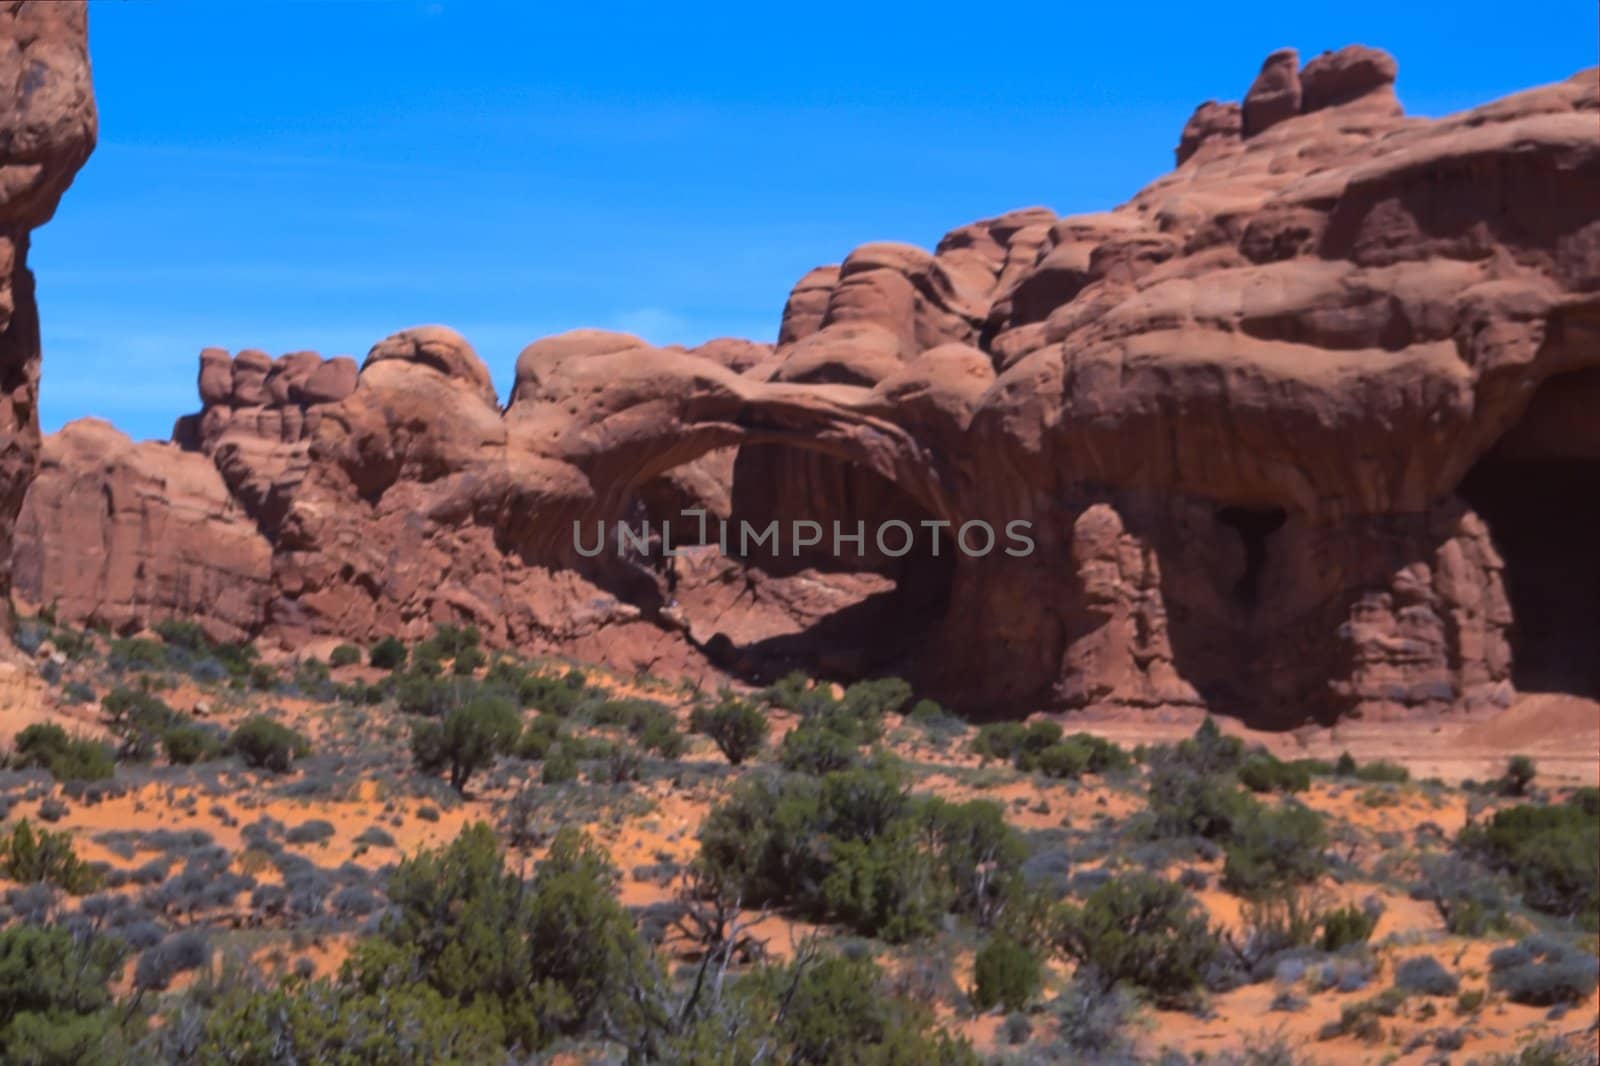 Arches National Park by melastmohican